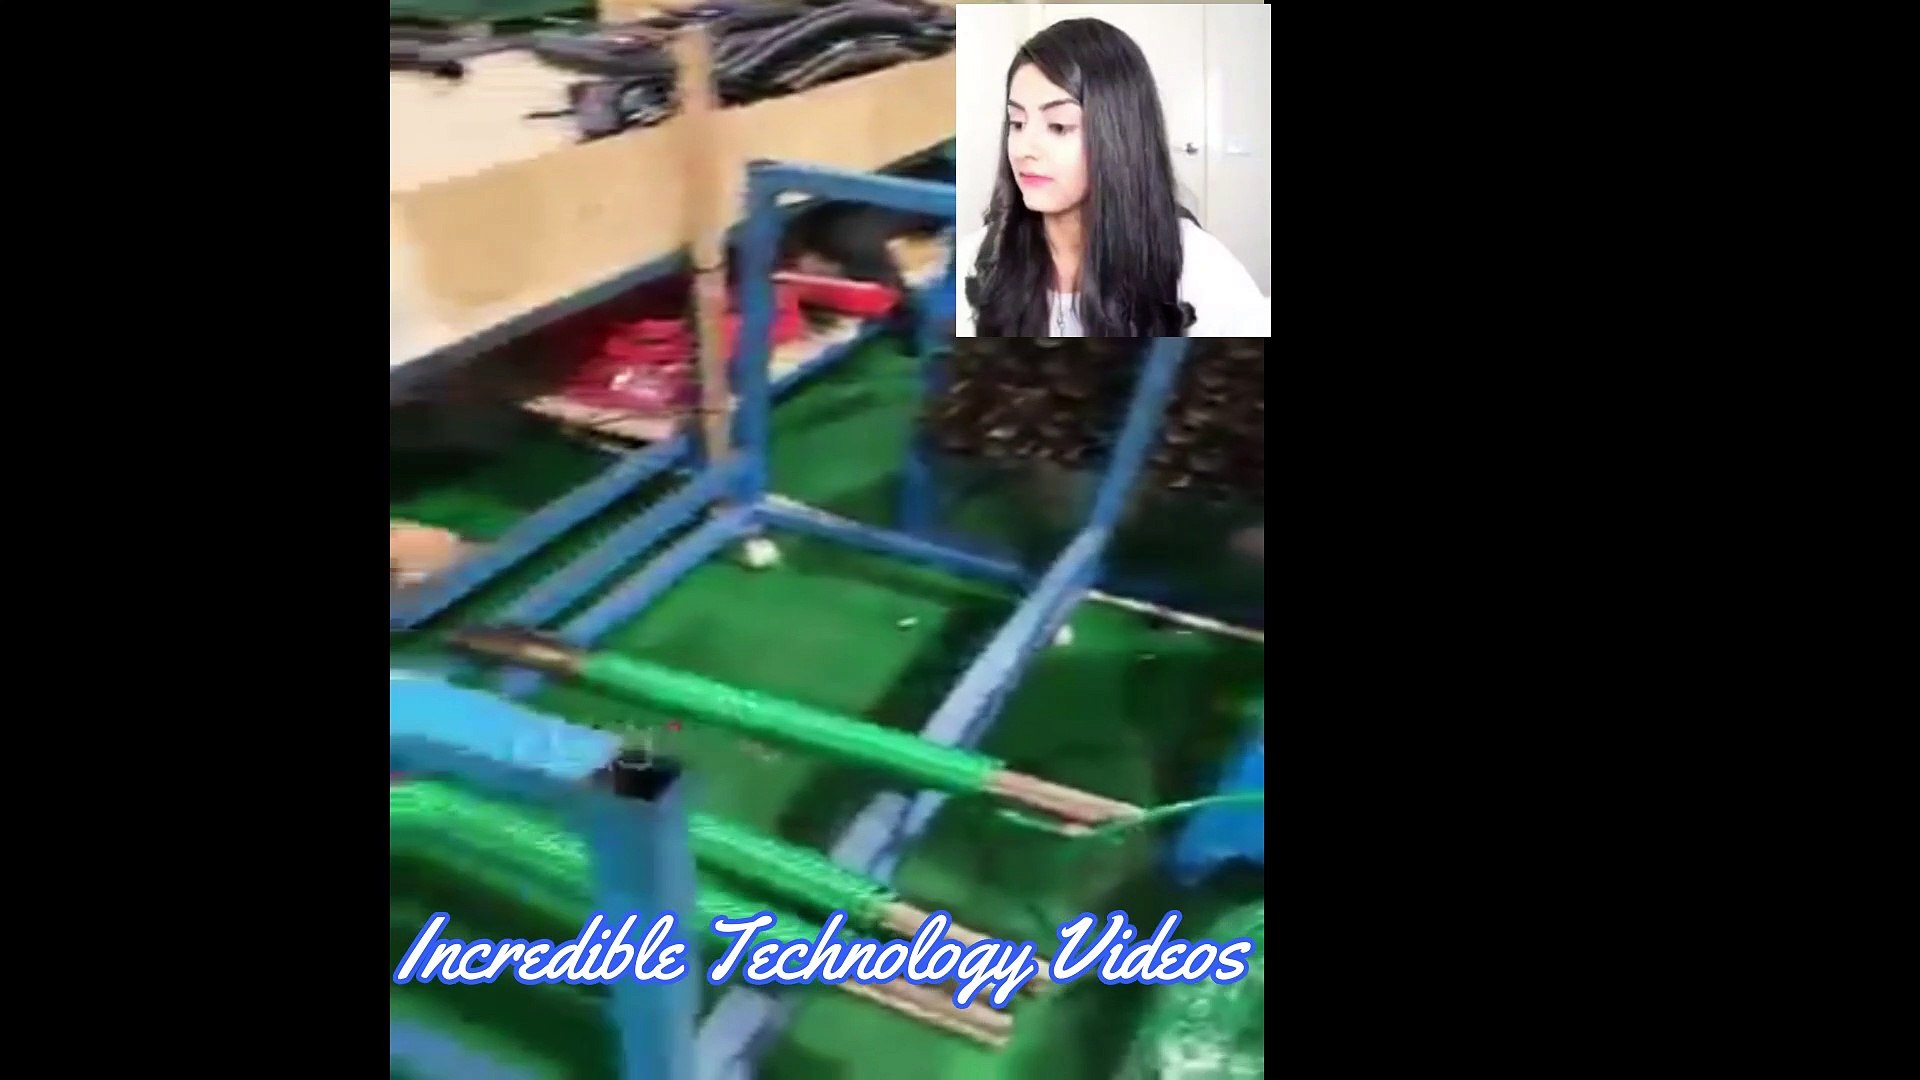 Incredible Technology Video || Technology videos